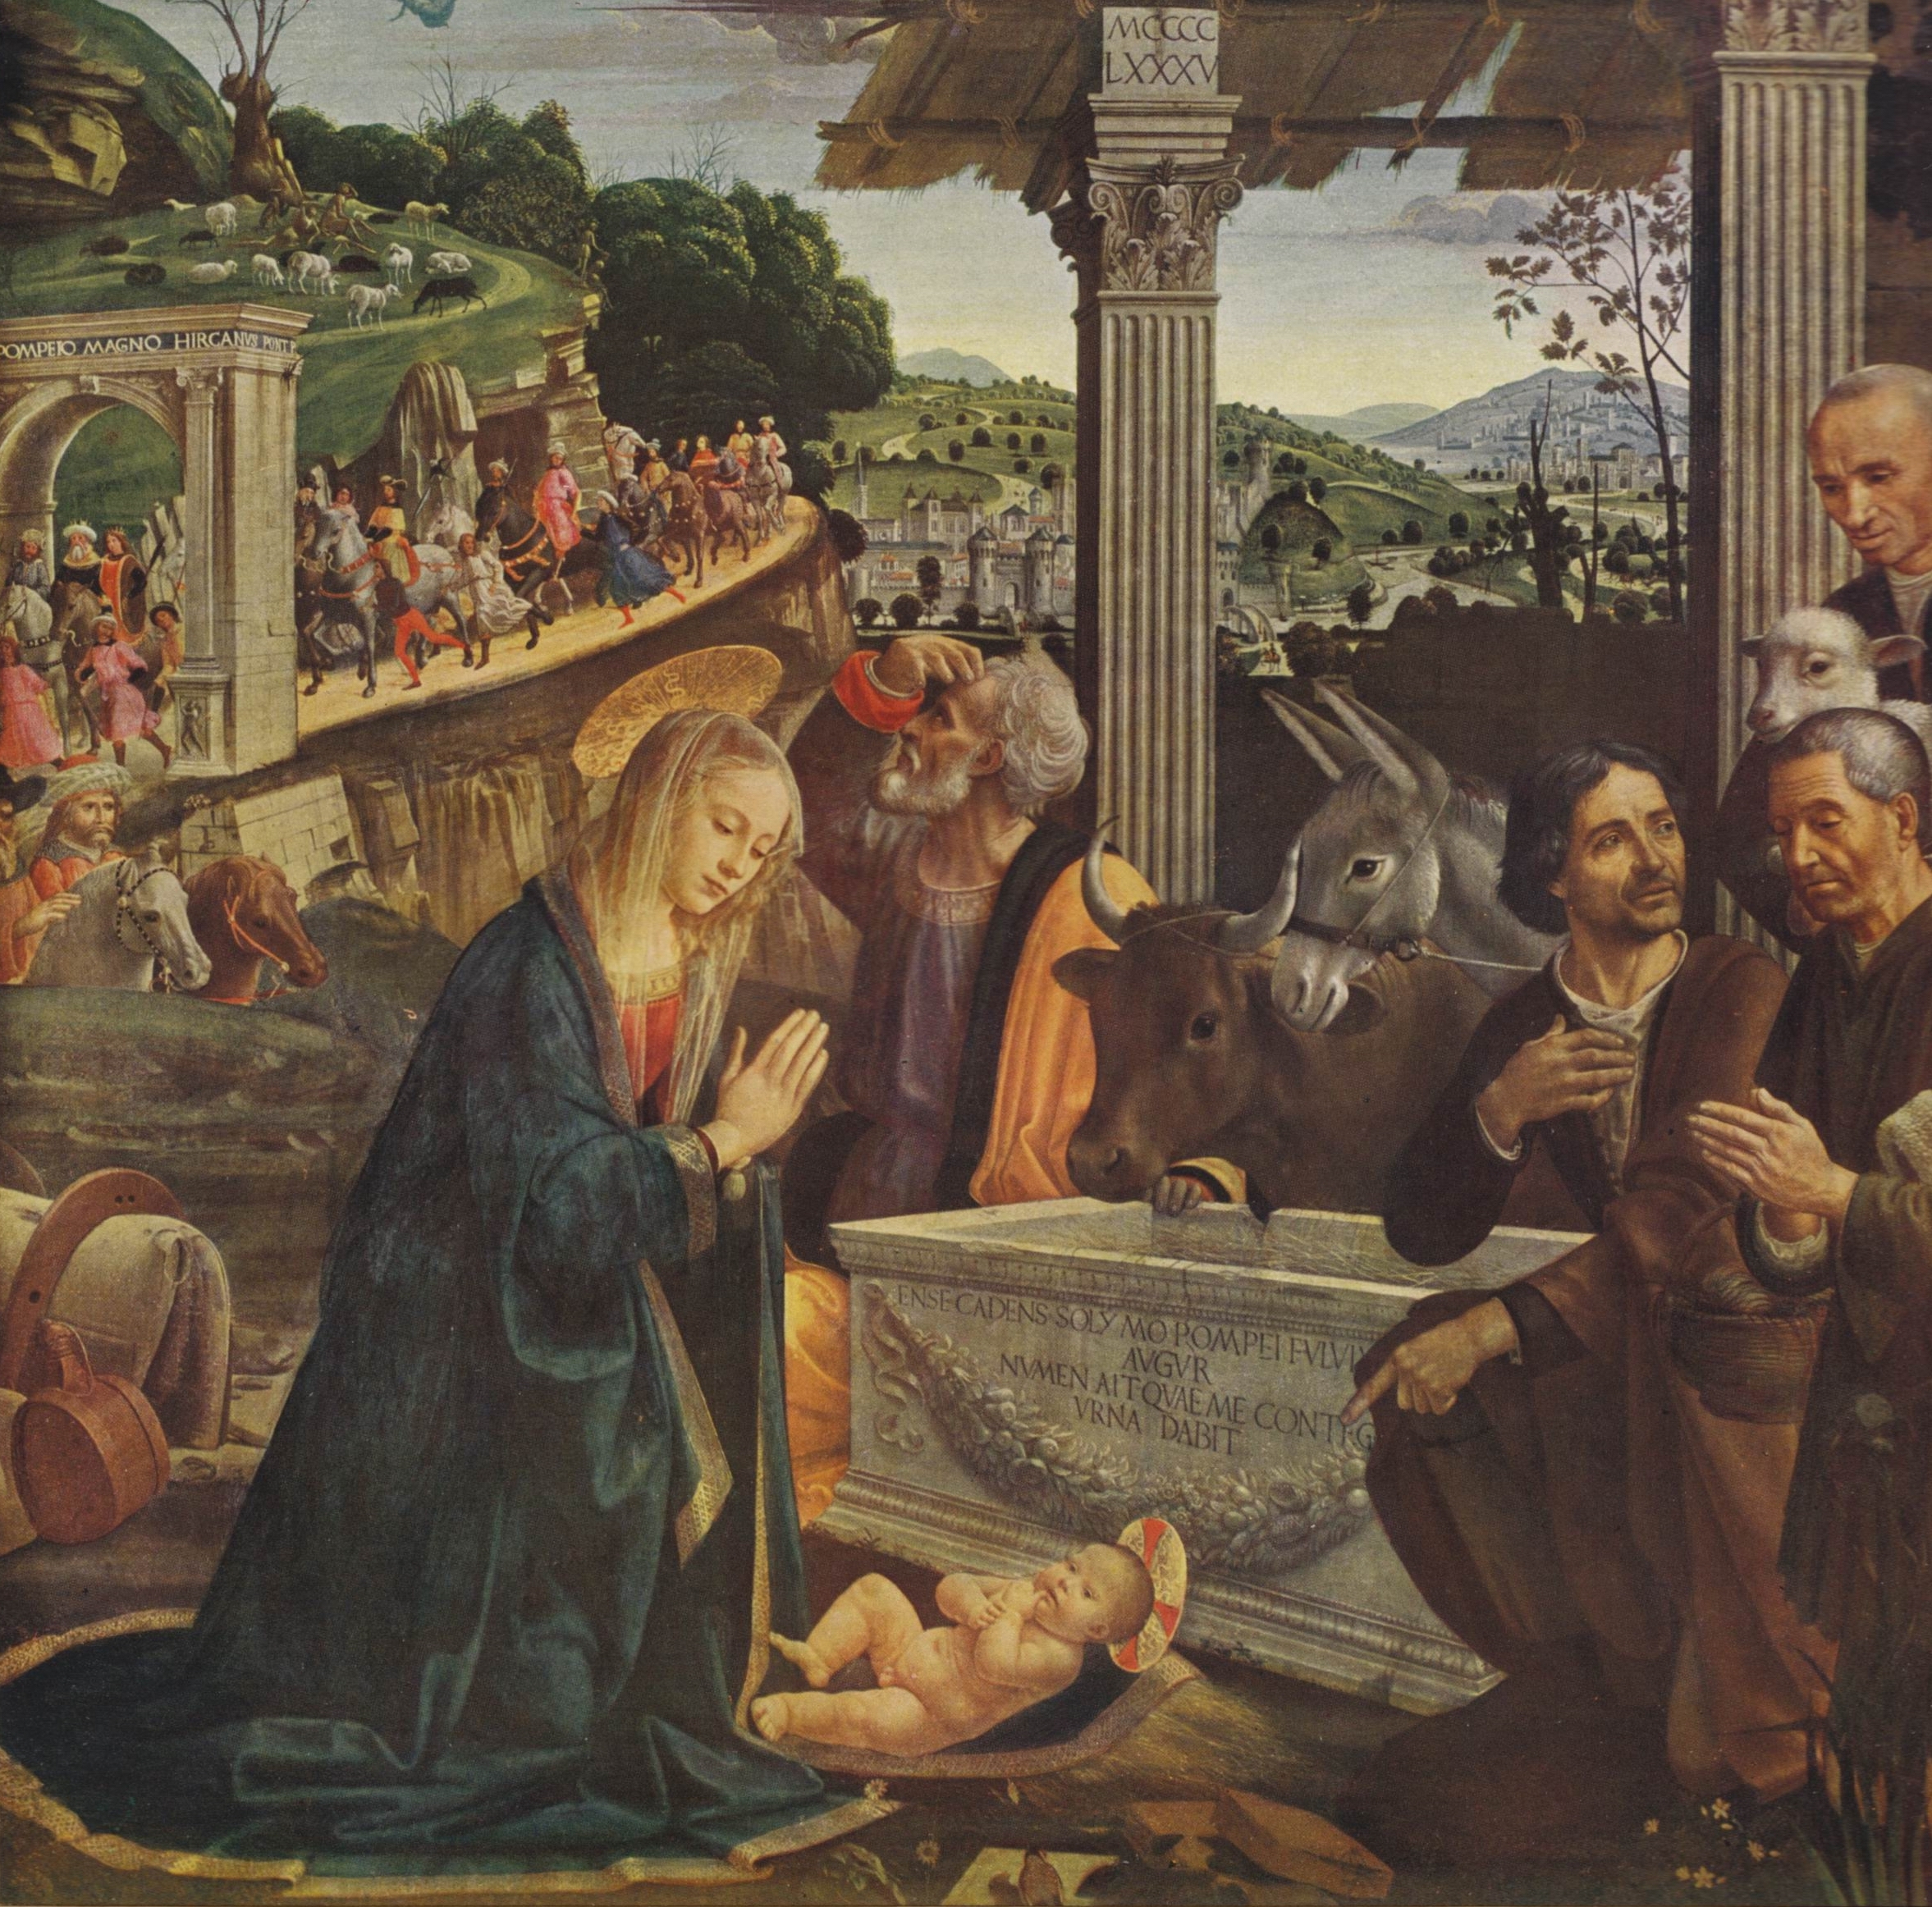 Painting by Ghirlandaio showing the Adoration of the Shepherds